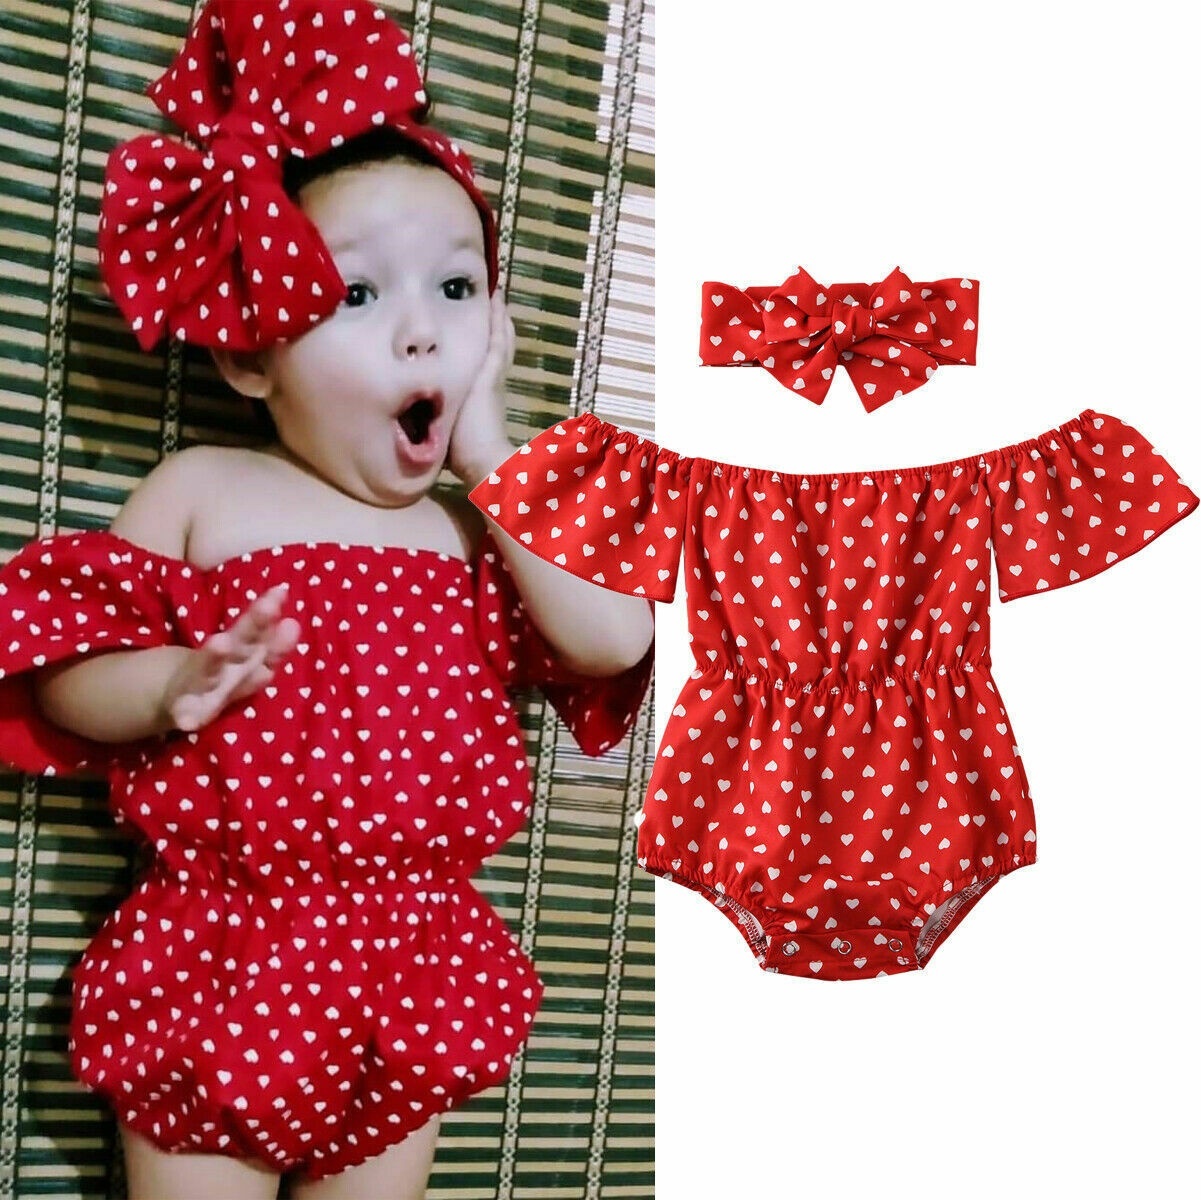 Infant Baby Girls Polka Dots Romper Jumpsuit Headband Outfits Summer Cloth Set